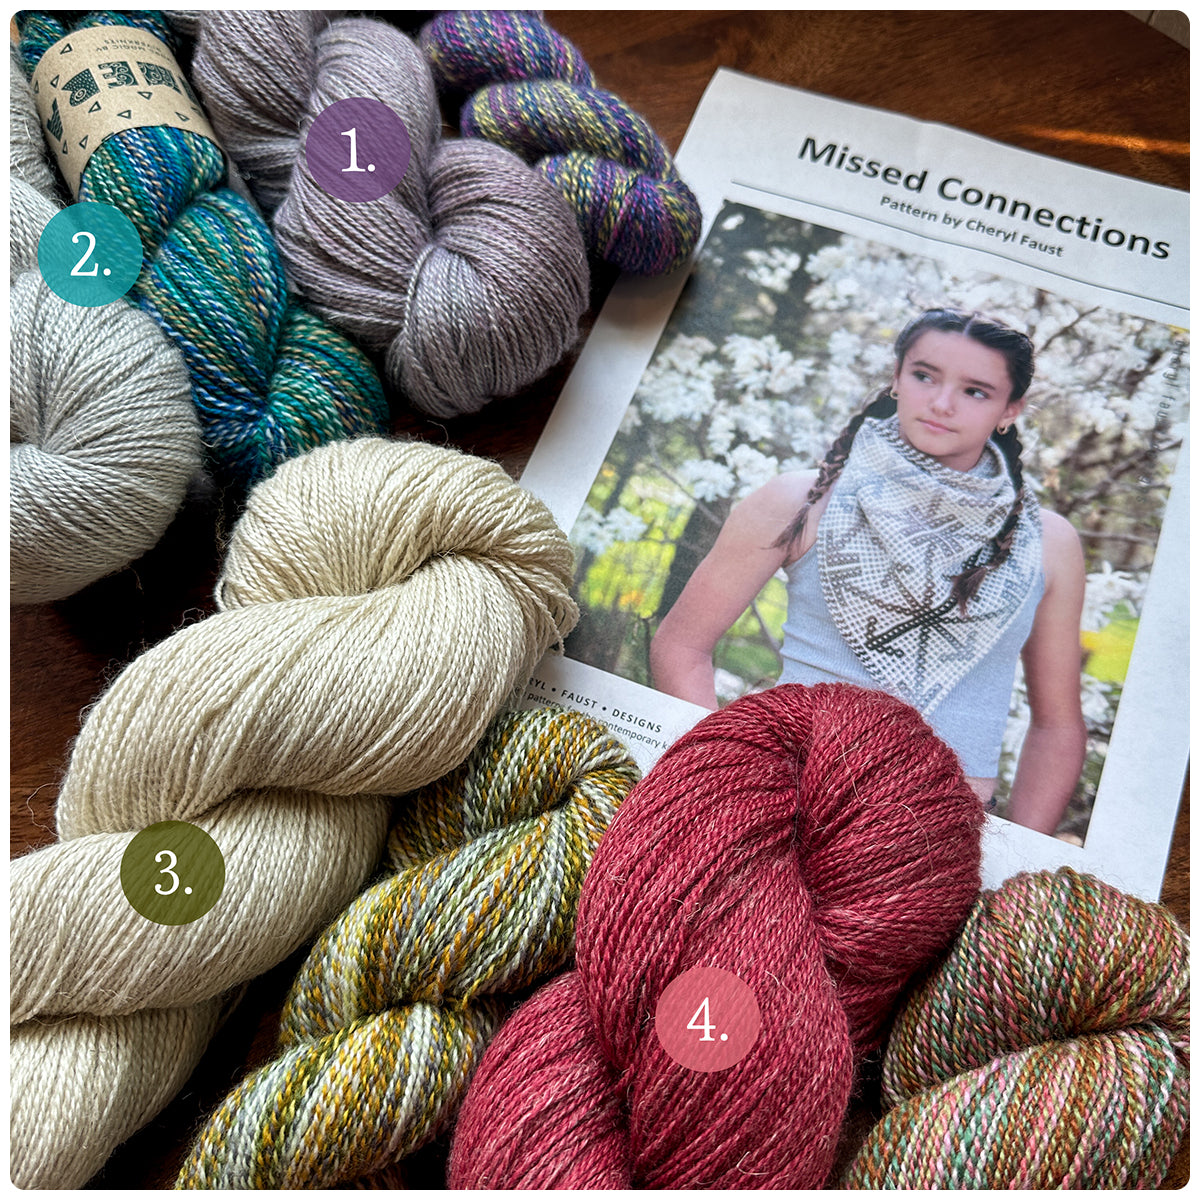 Missed Connections Shawl Kits